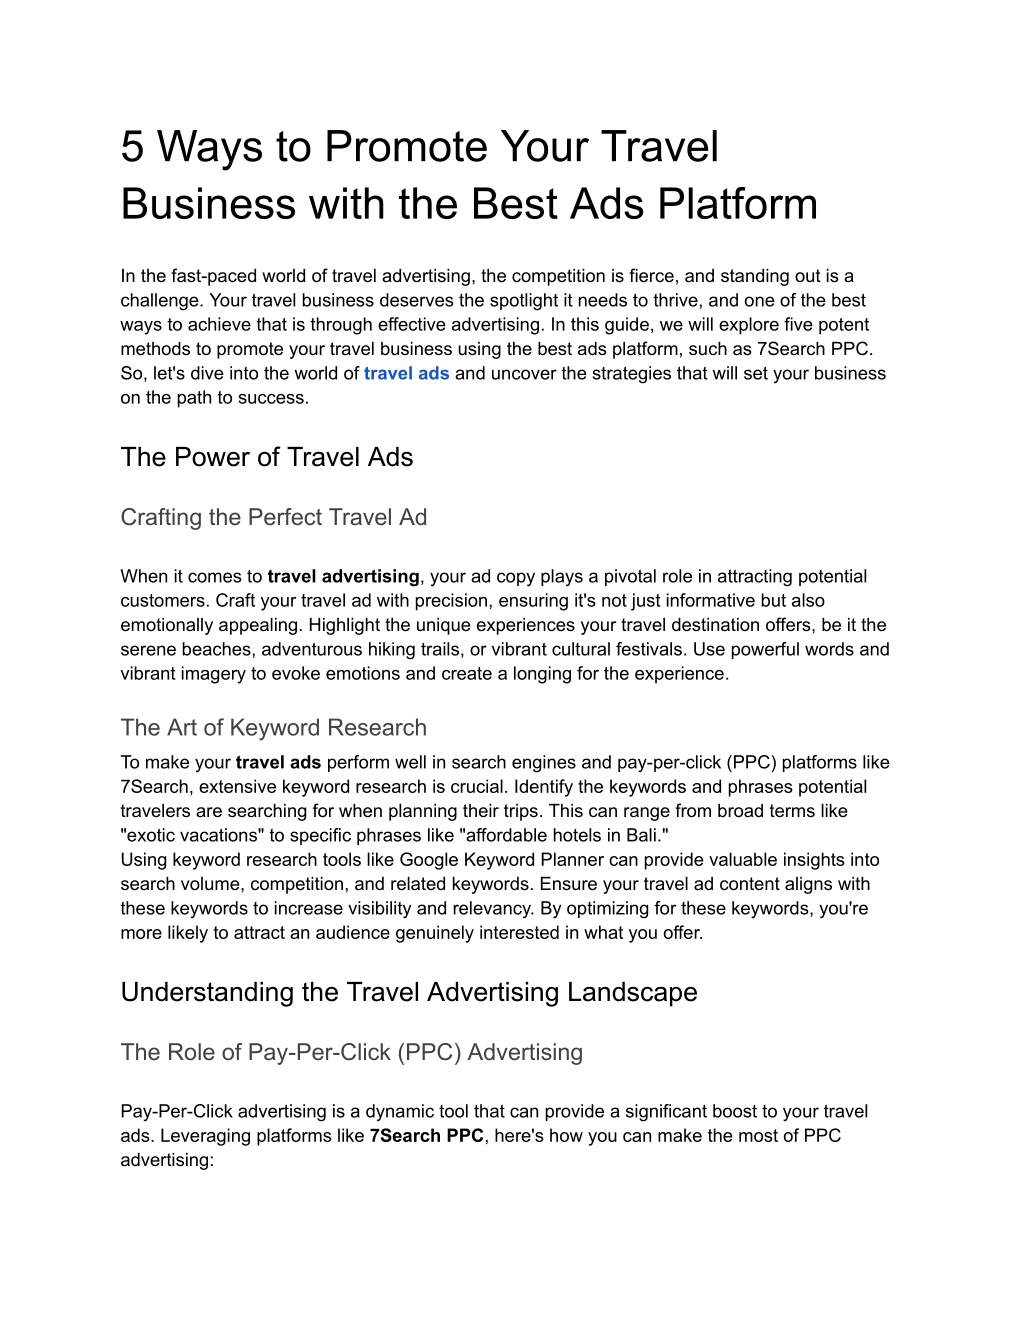 PPT - 5 Ways to Promote Your Travel Business with the Best Ads Platform  PowerPoint Presentation - ID:12568694